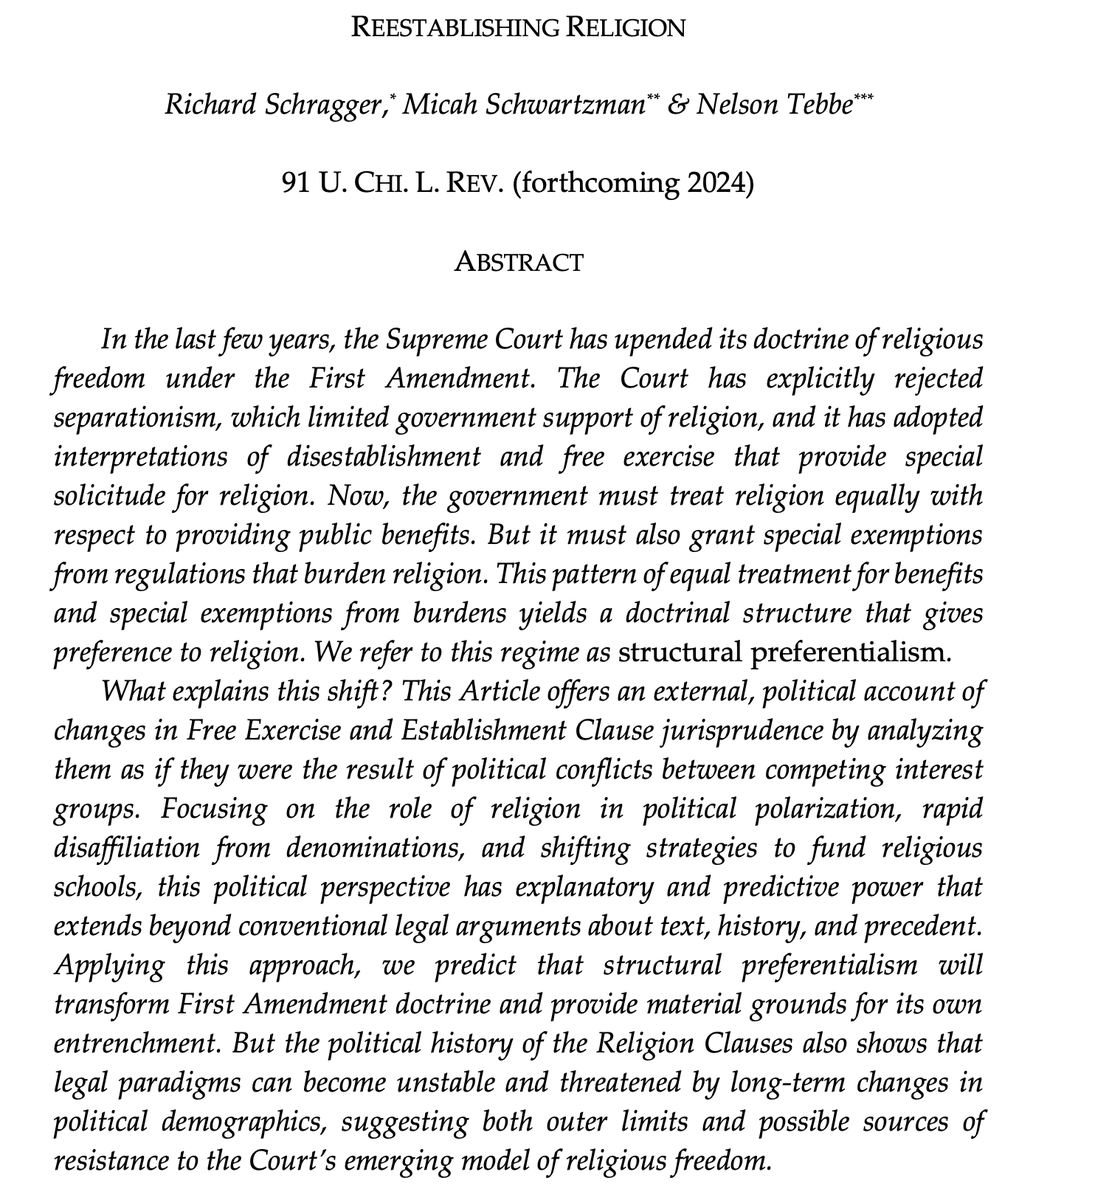 My latest with @RichSchragger and @NelsonTebbe is available now on @SSRN. 'Reestablishing Religion' is forthcoming from @UChiLRev. papers.ssrn.com/sol3/papers.cf…